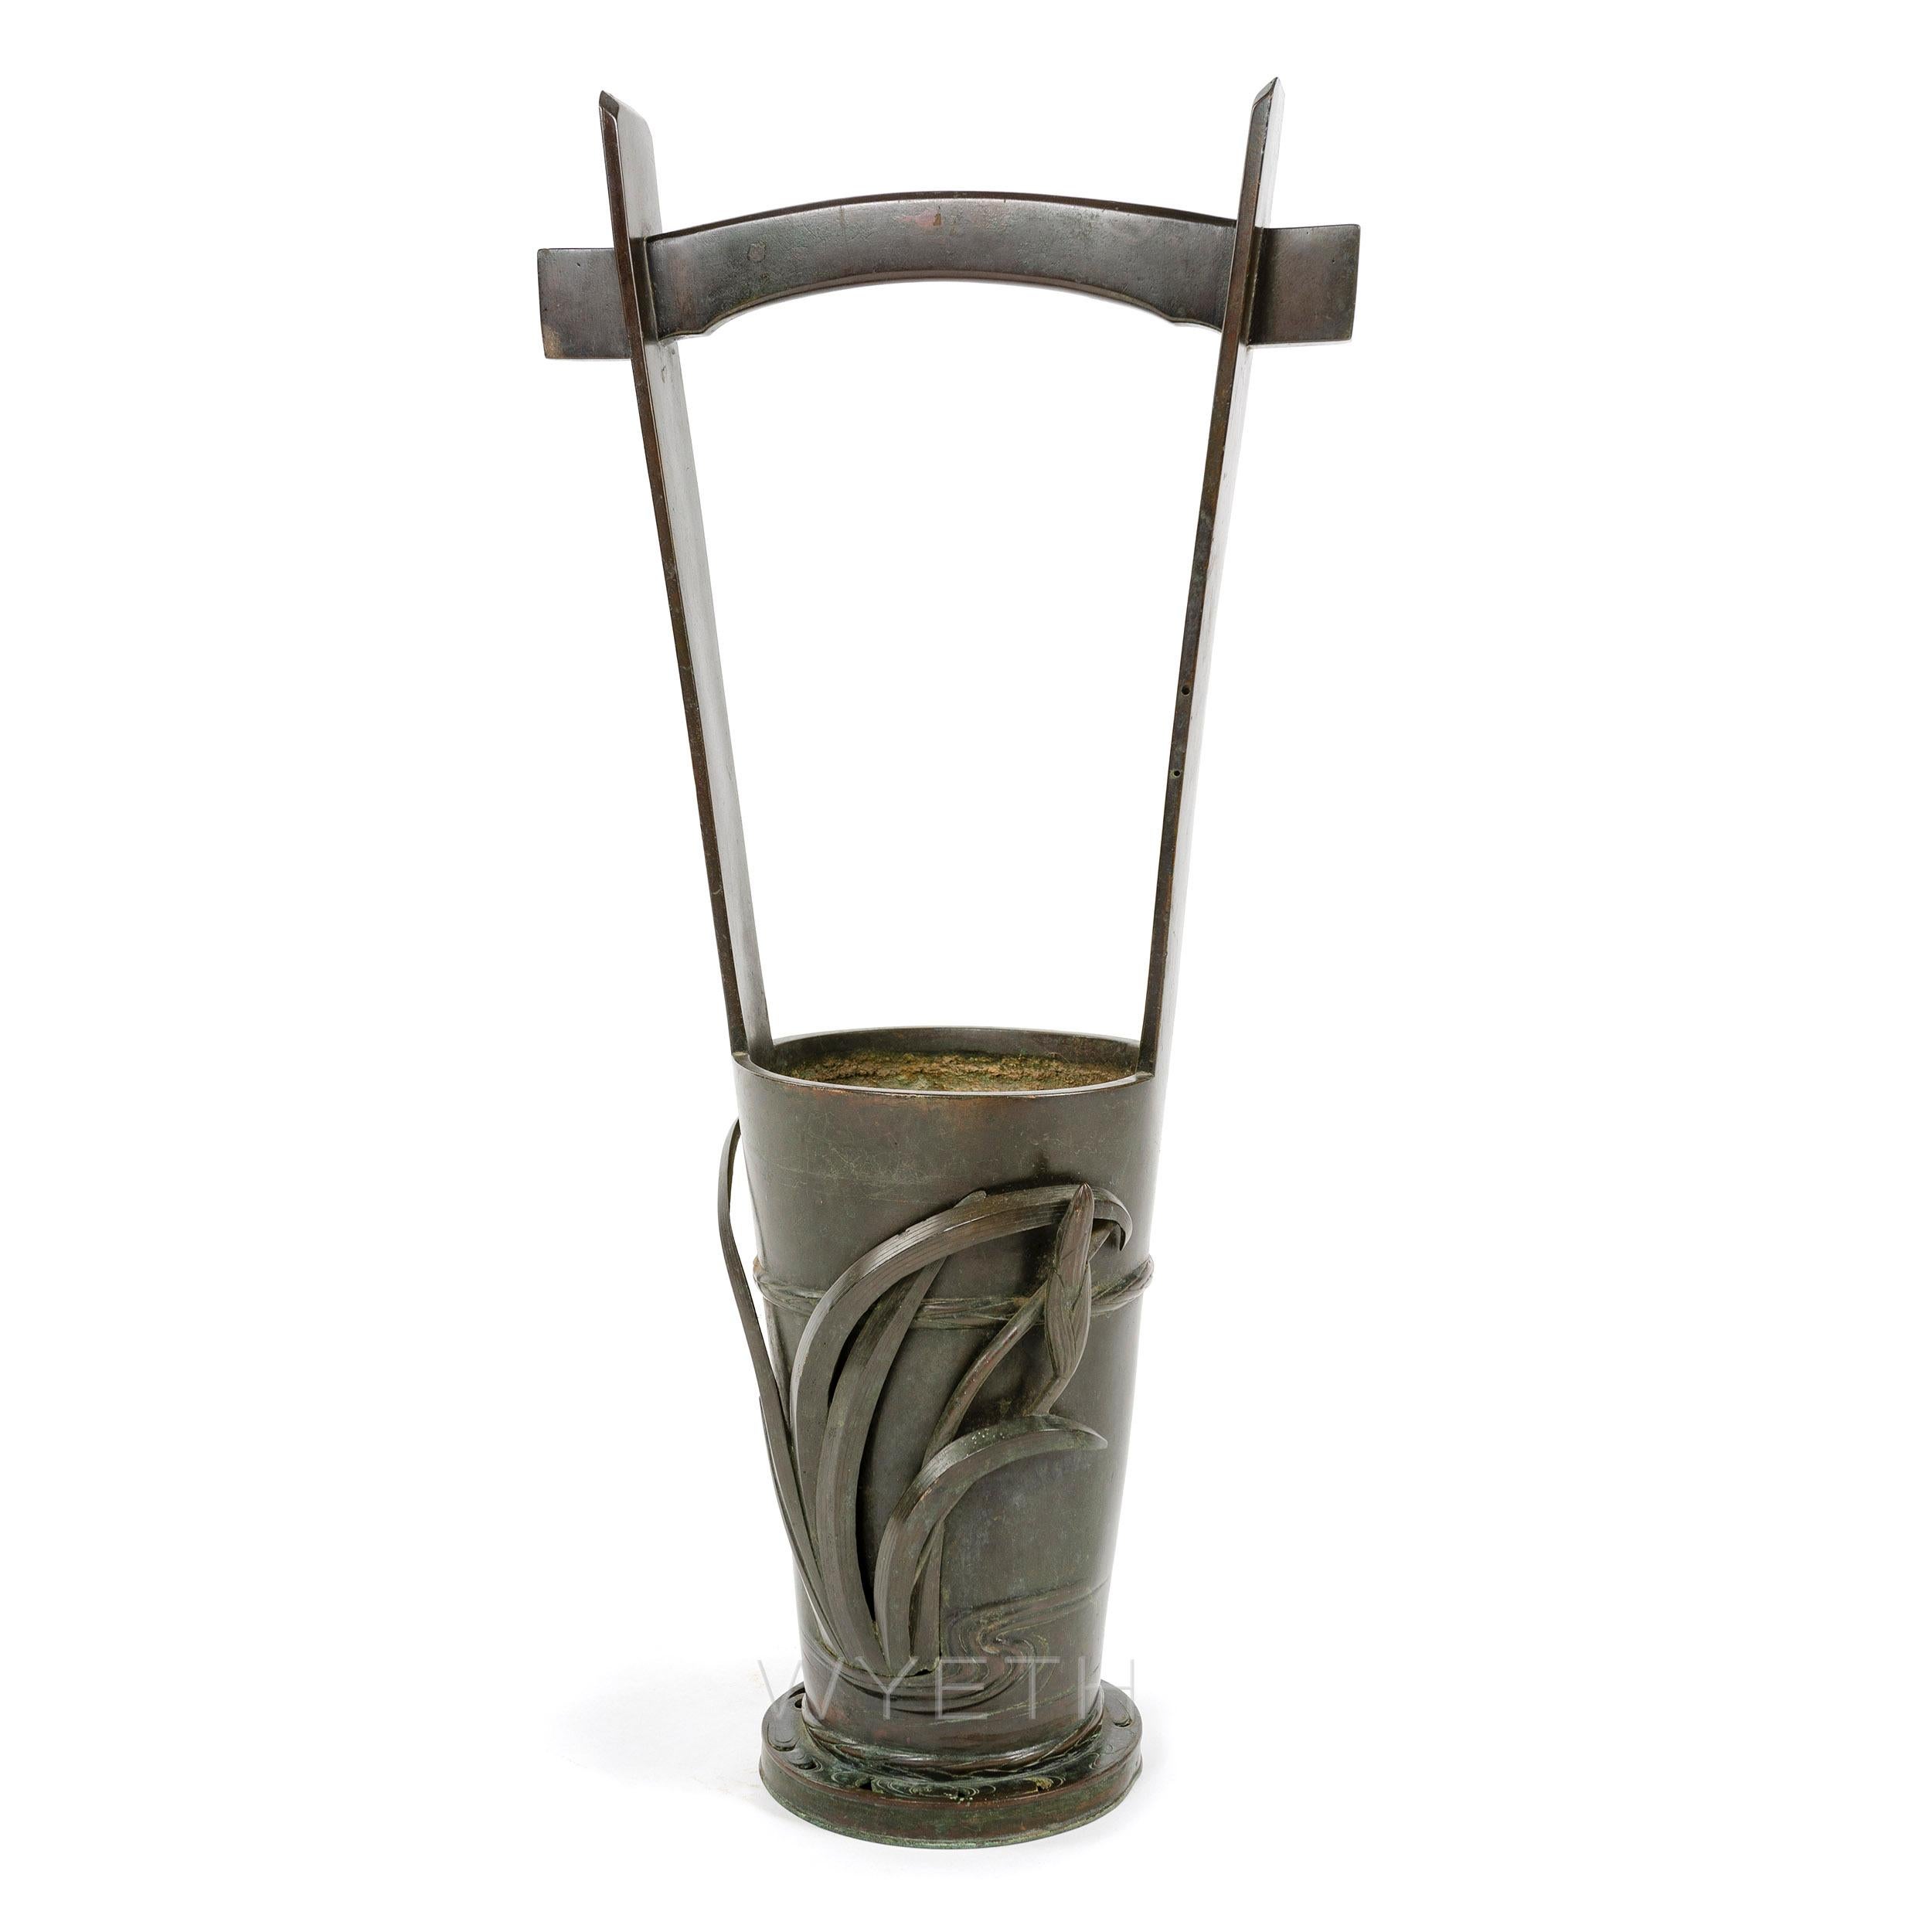 A finely crafted darkened bronze umbrella stand with an expressive leaf motif.